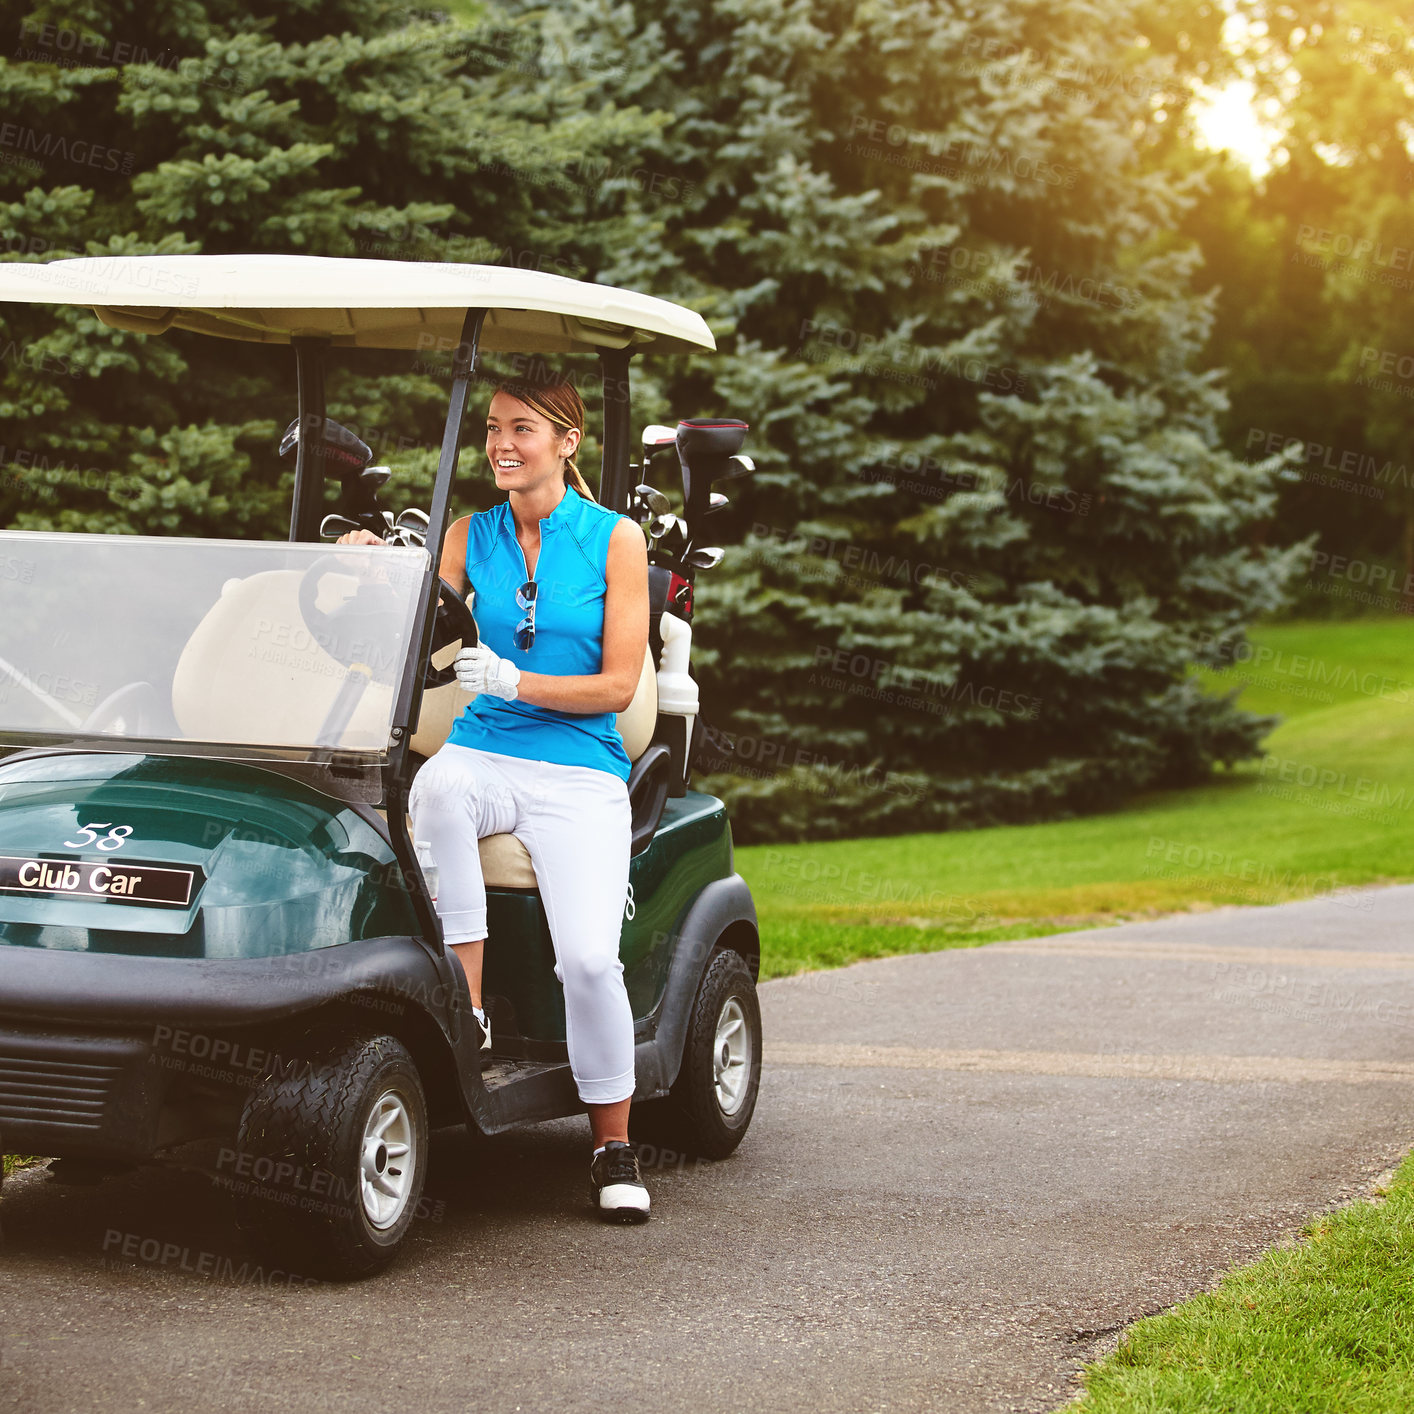 Buy stock photo Full length shot of an attractive young woman sitting in a golf cart on a golf course